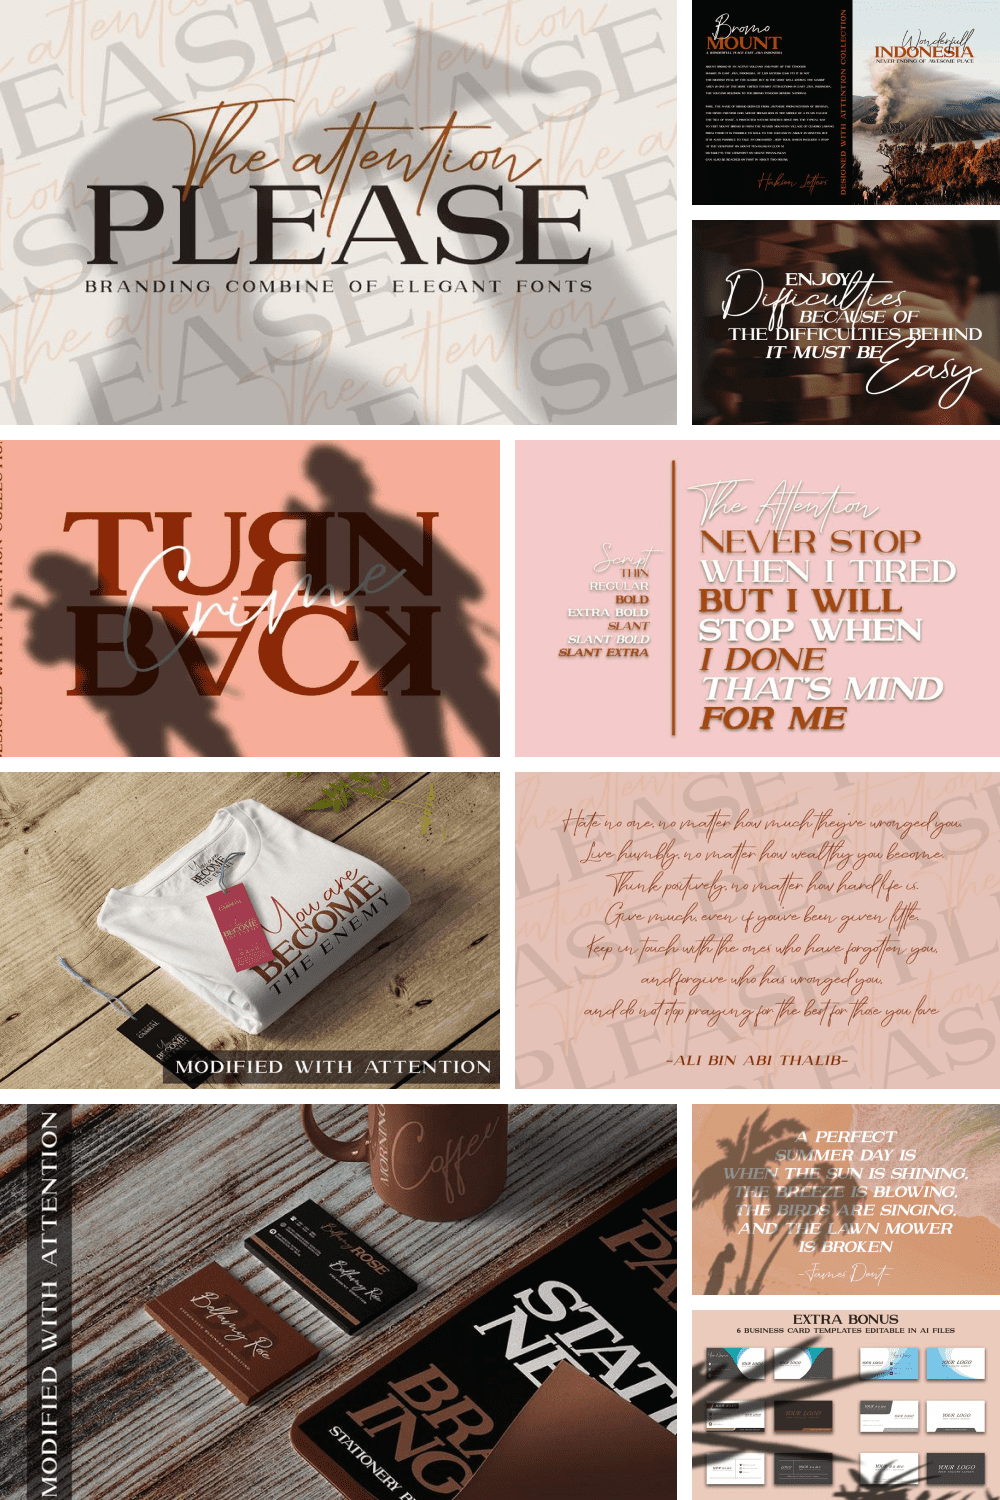 A beautiful duo font brand that makes for gorgeous logos, posters, wedding invitations, blog posts, social media, and more.